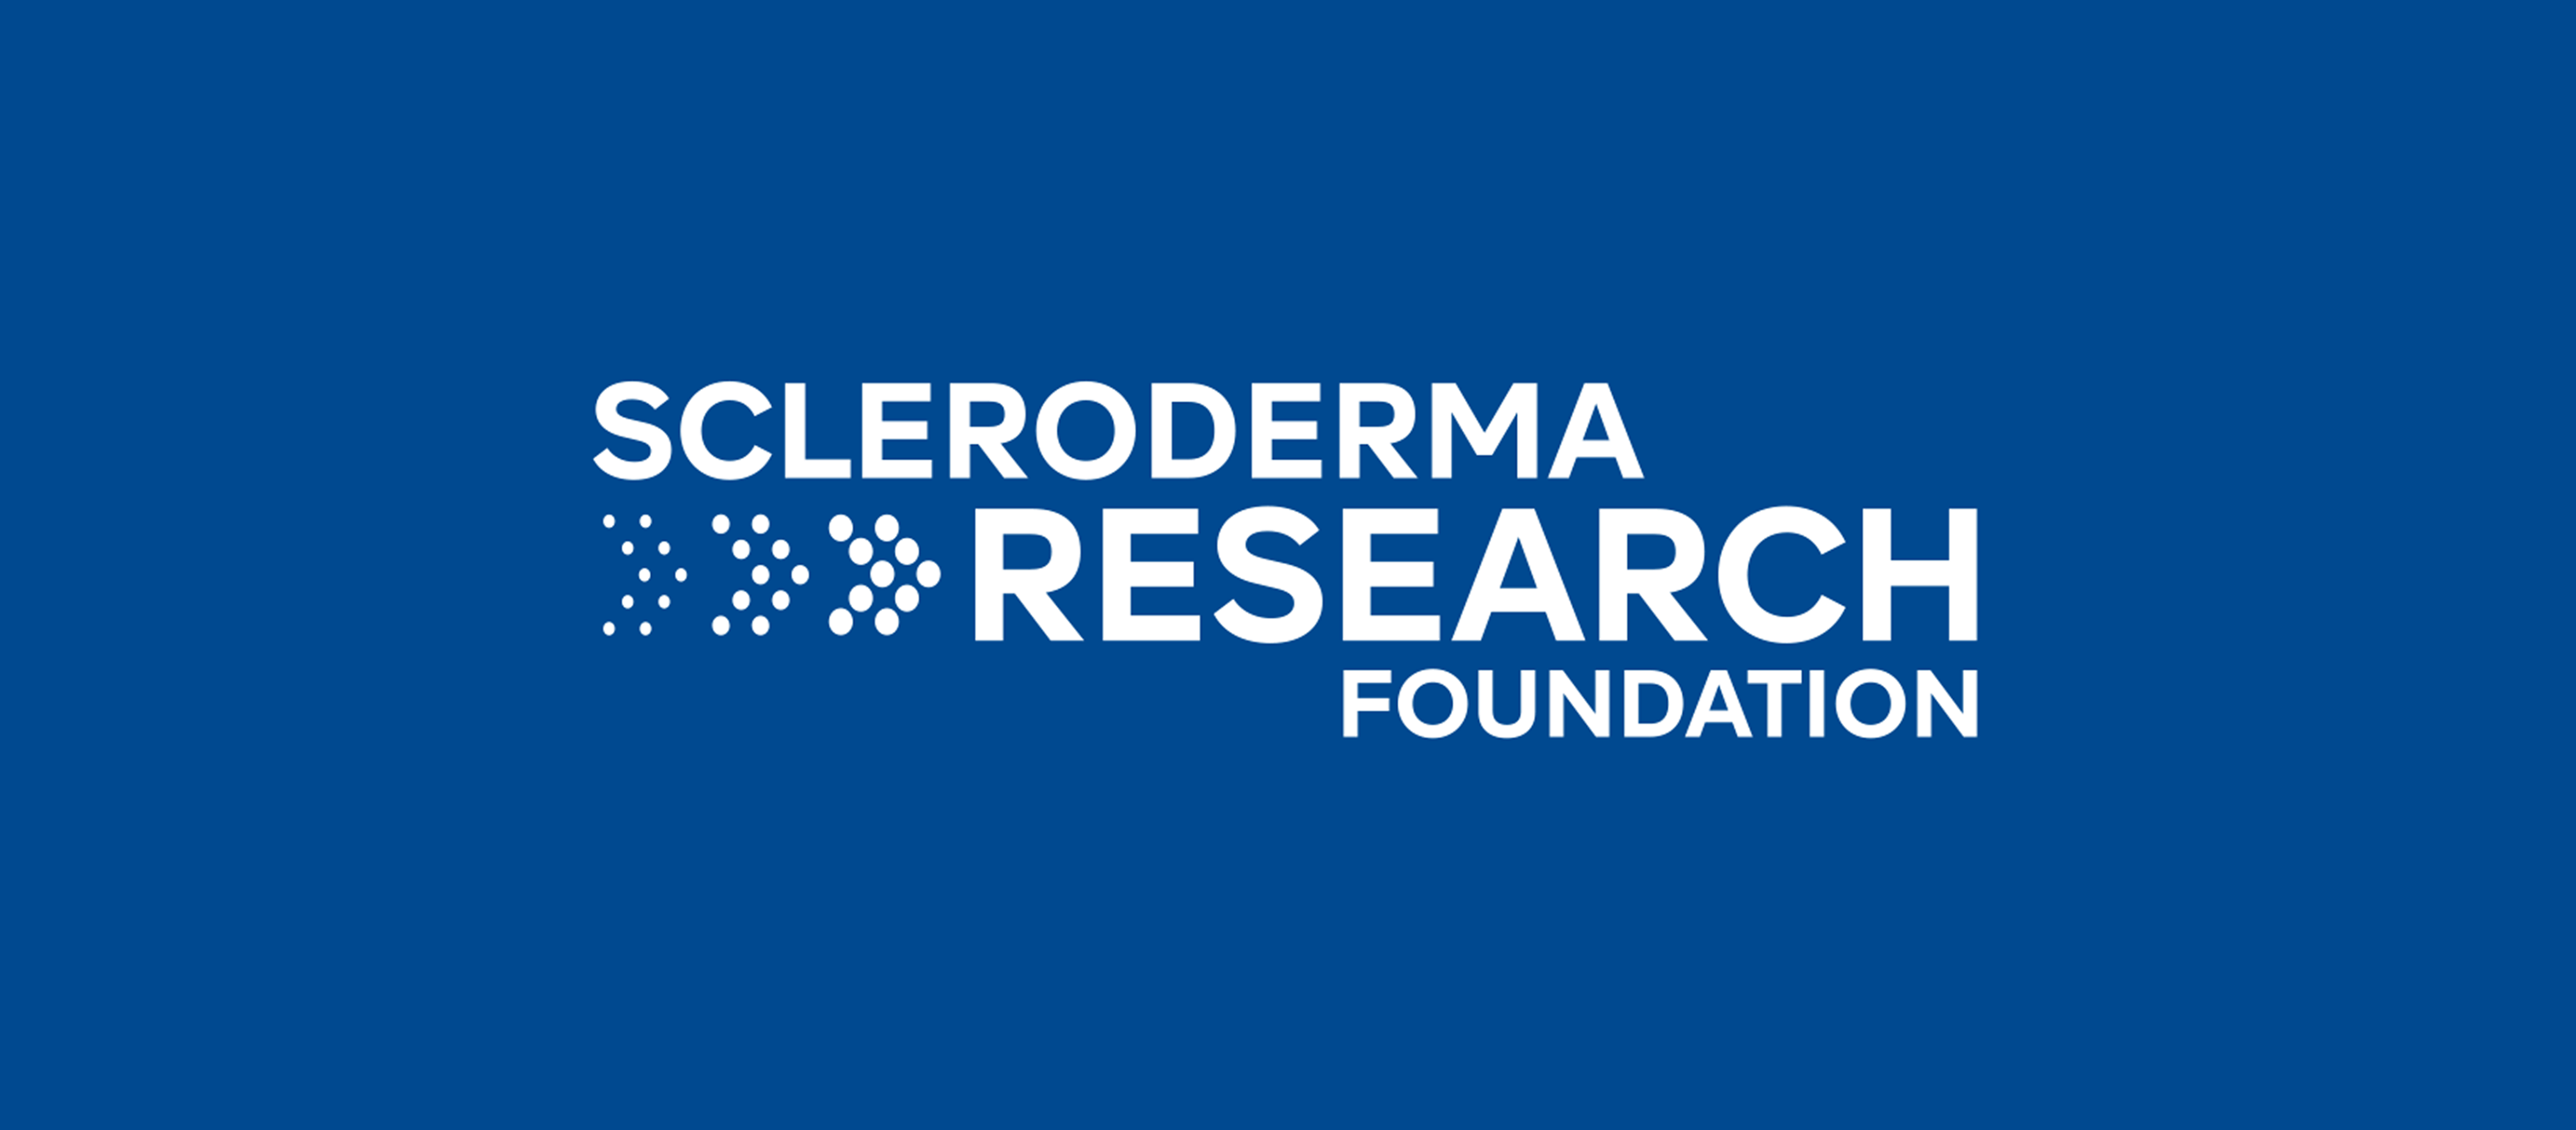 Scleroderma Research Foundation (SRF)